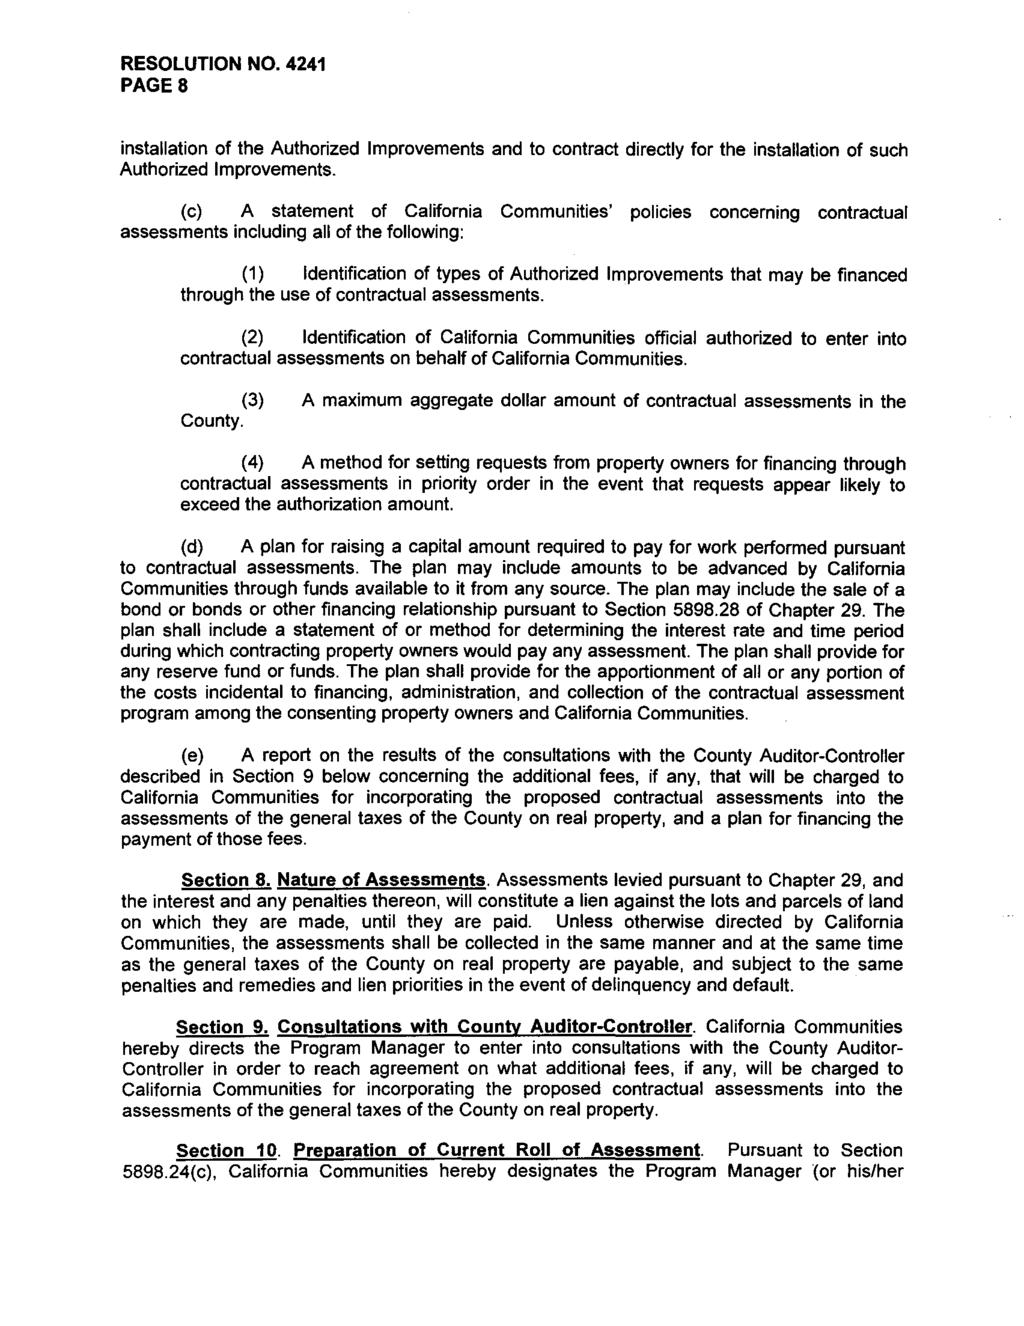 RESOLUTION NO. 4241 PAGES installation of the Authorized Improvements and to contract directly for the installation of such Authorized Improvements.